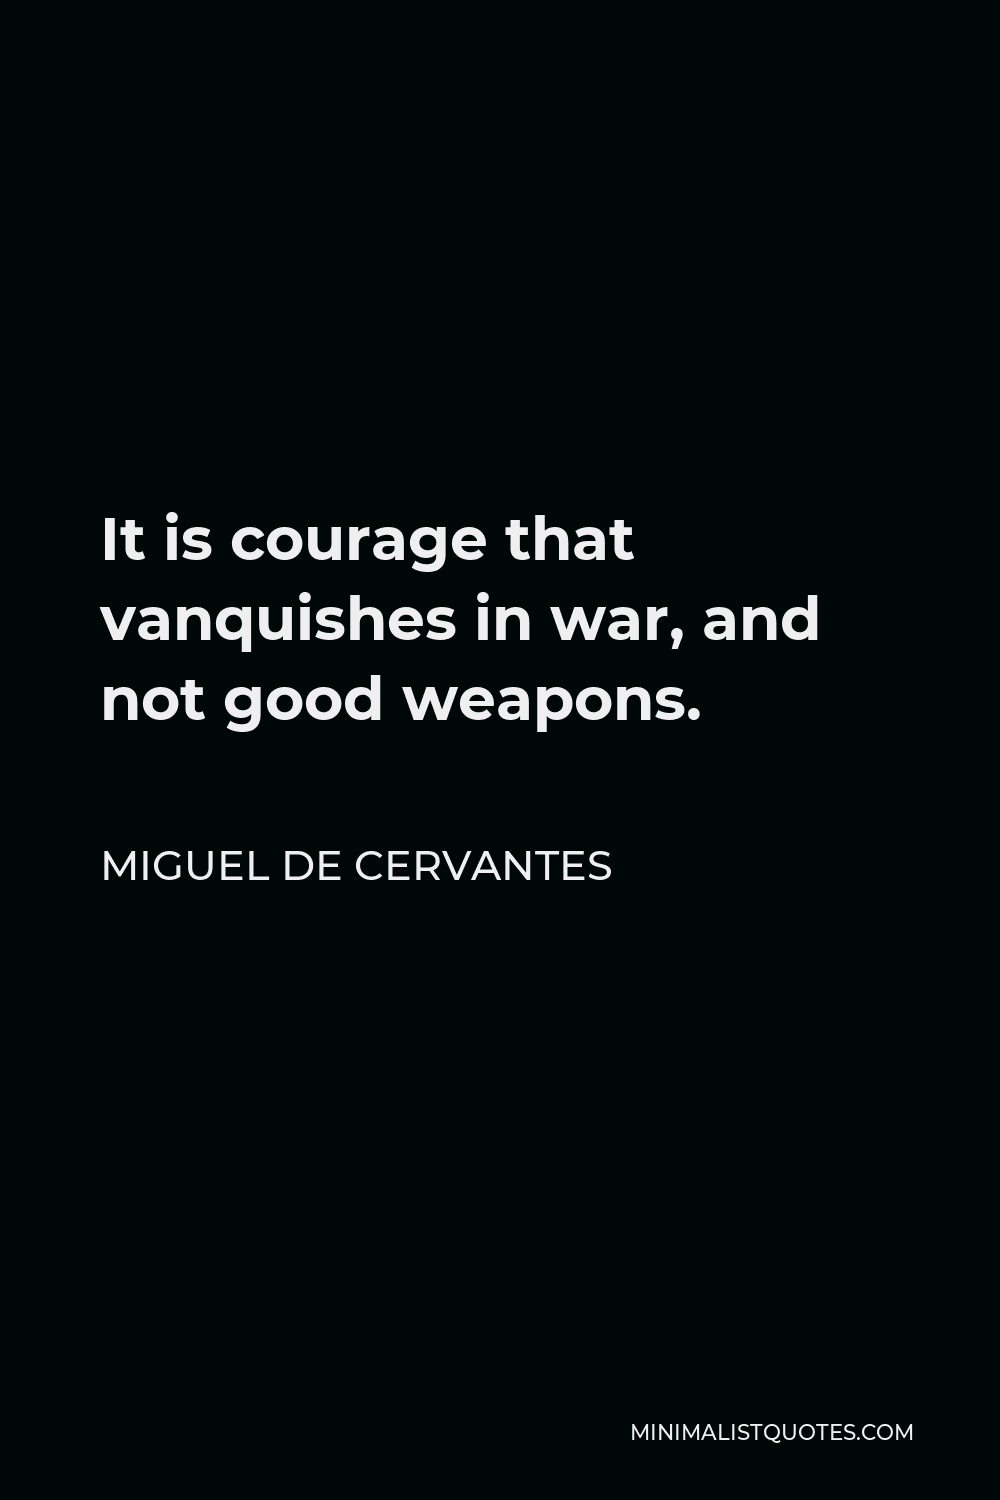 Miguel de Cervantes Quote - It is courage that vanquishes in war, and not good weapons.